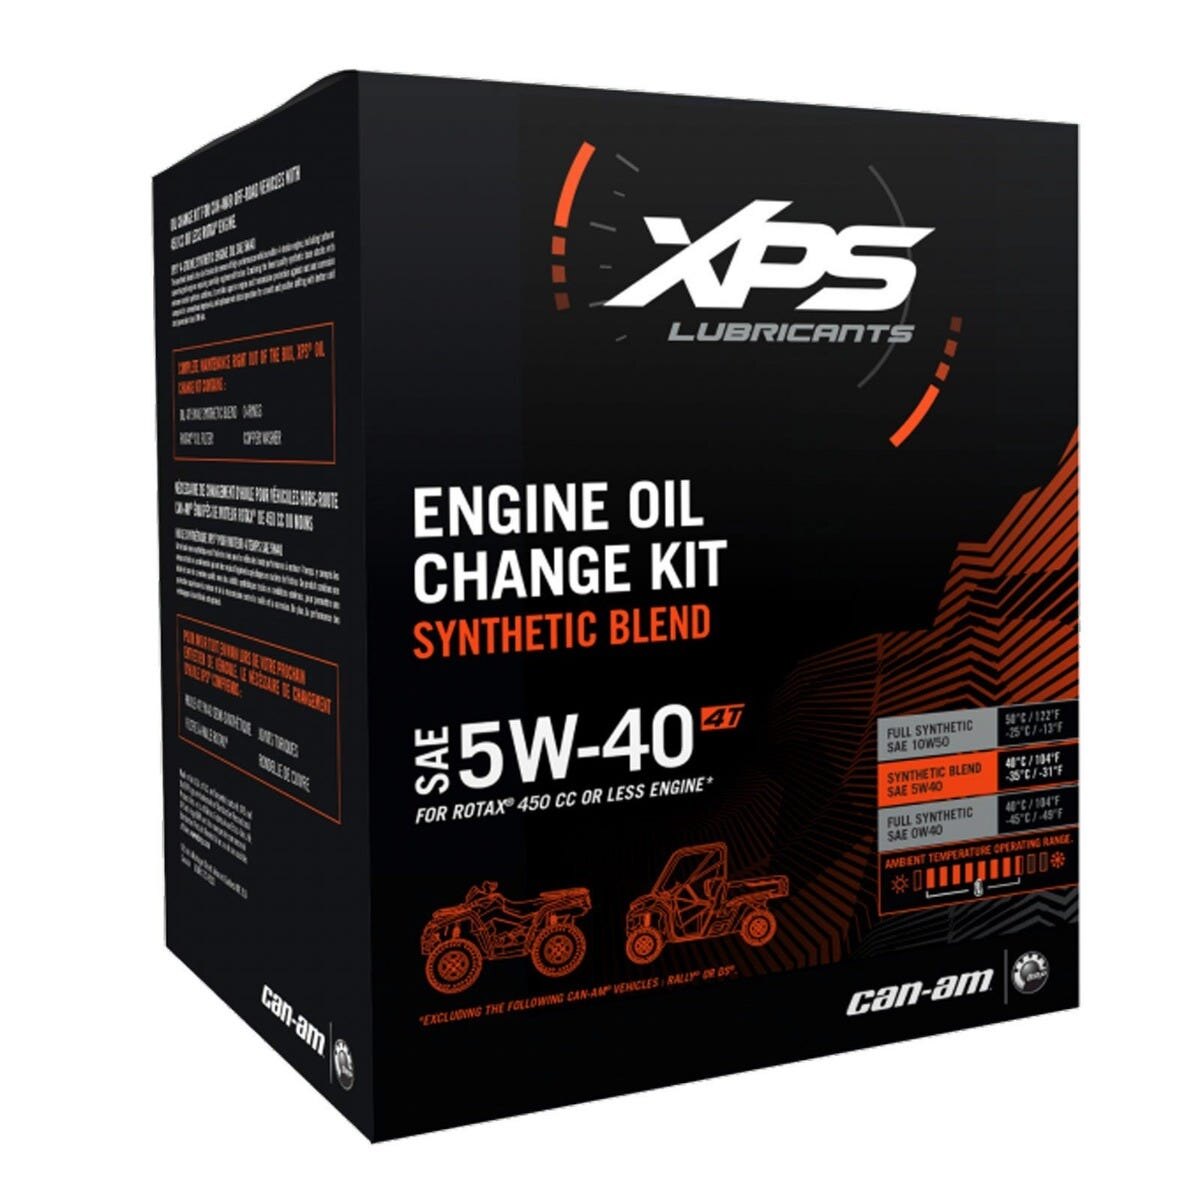 5W 40 Synthetic Blend Oil Change Kit for Can Am ATV/SSV Rotax 450 cc or Smaller Engines